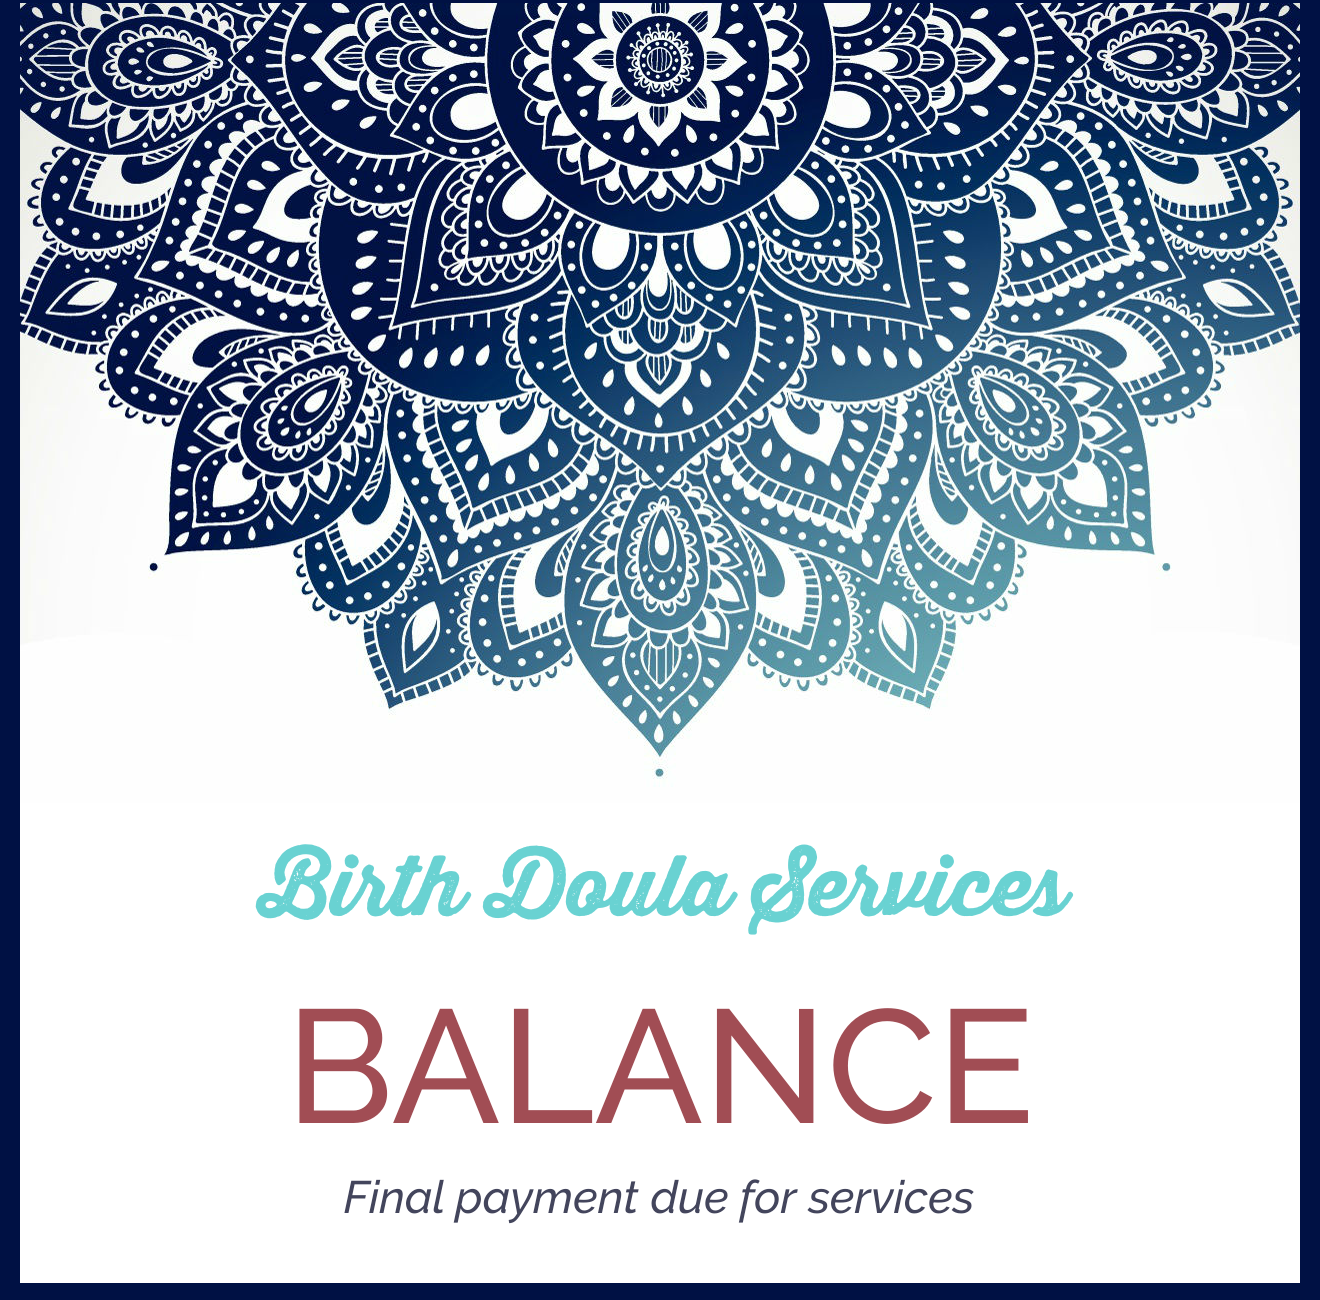 Balance Payment for Birth Doula Services